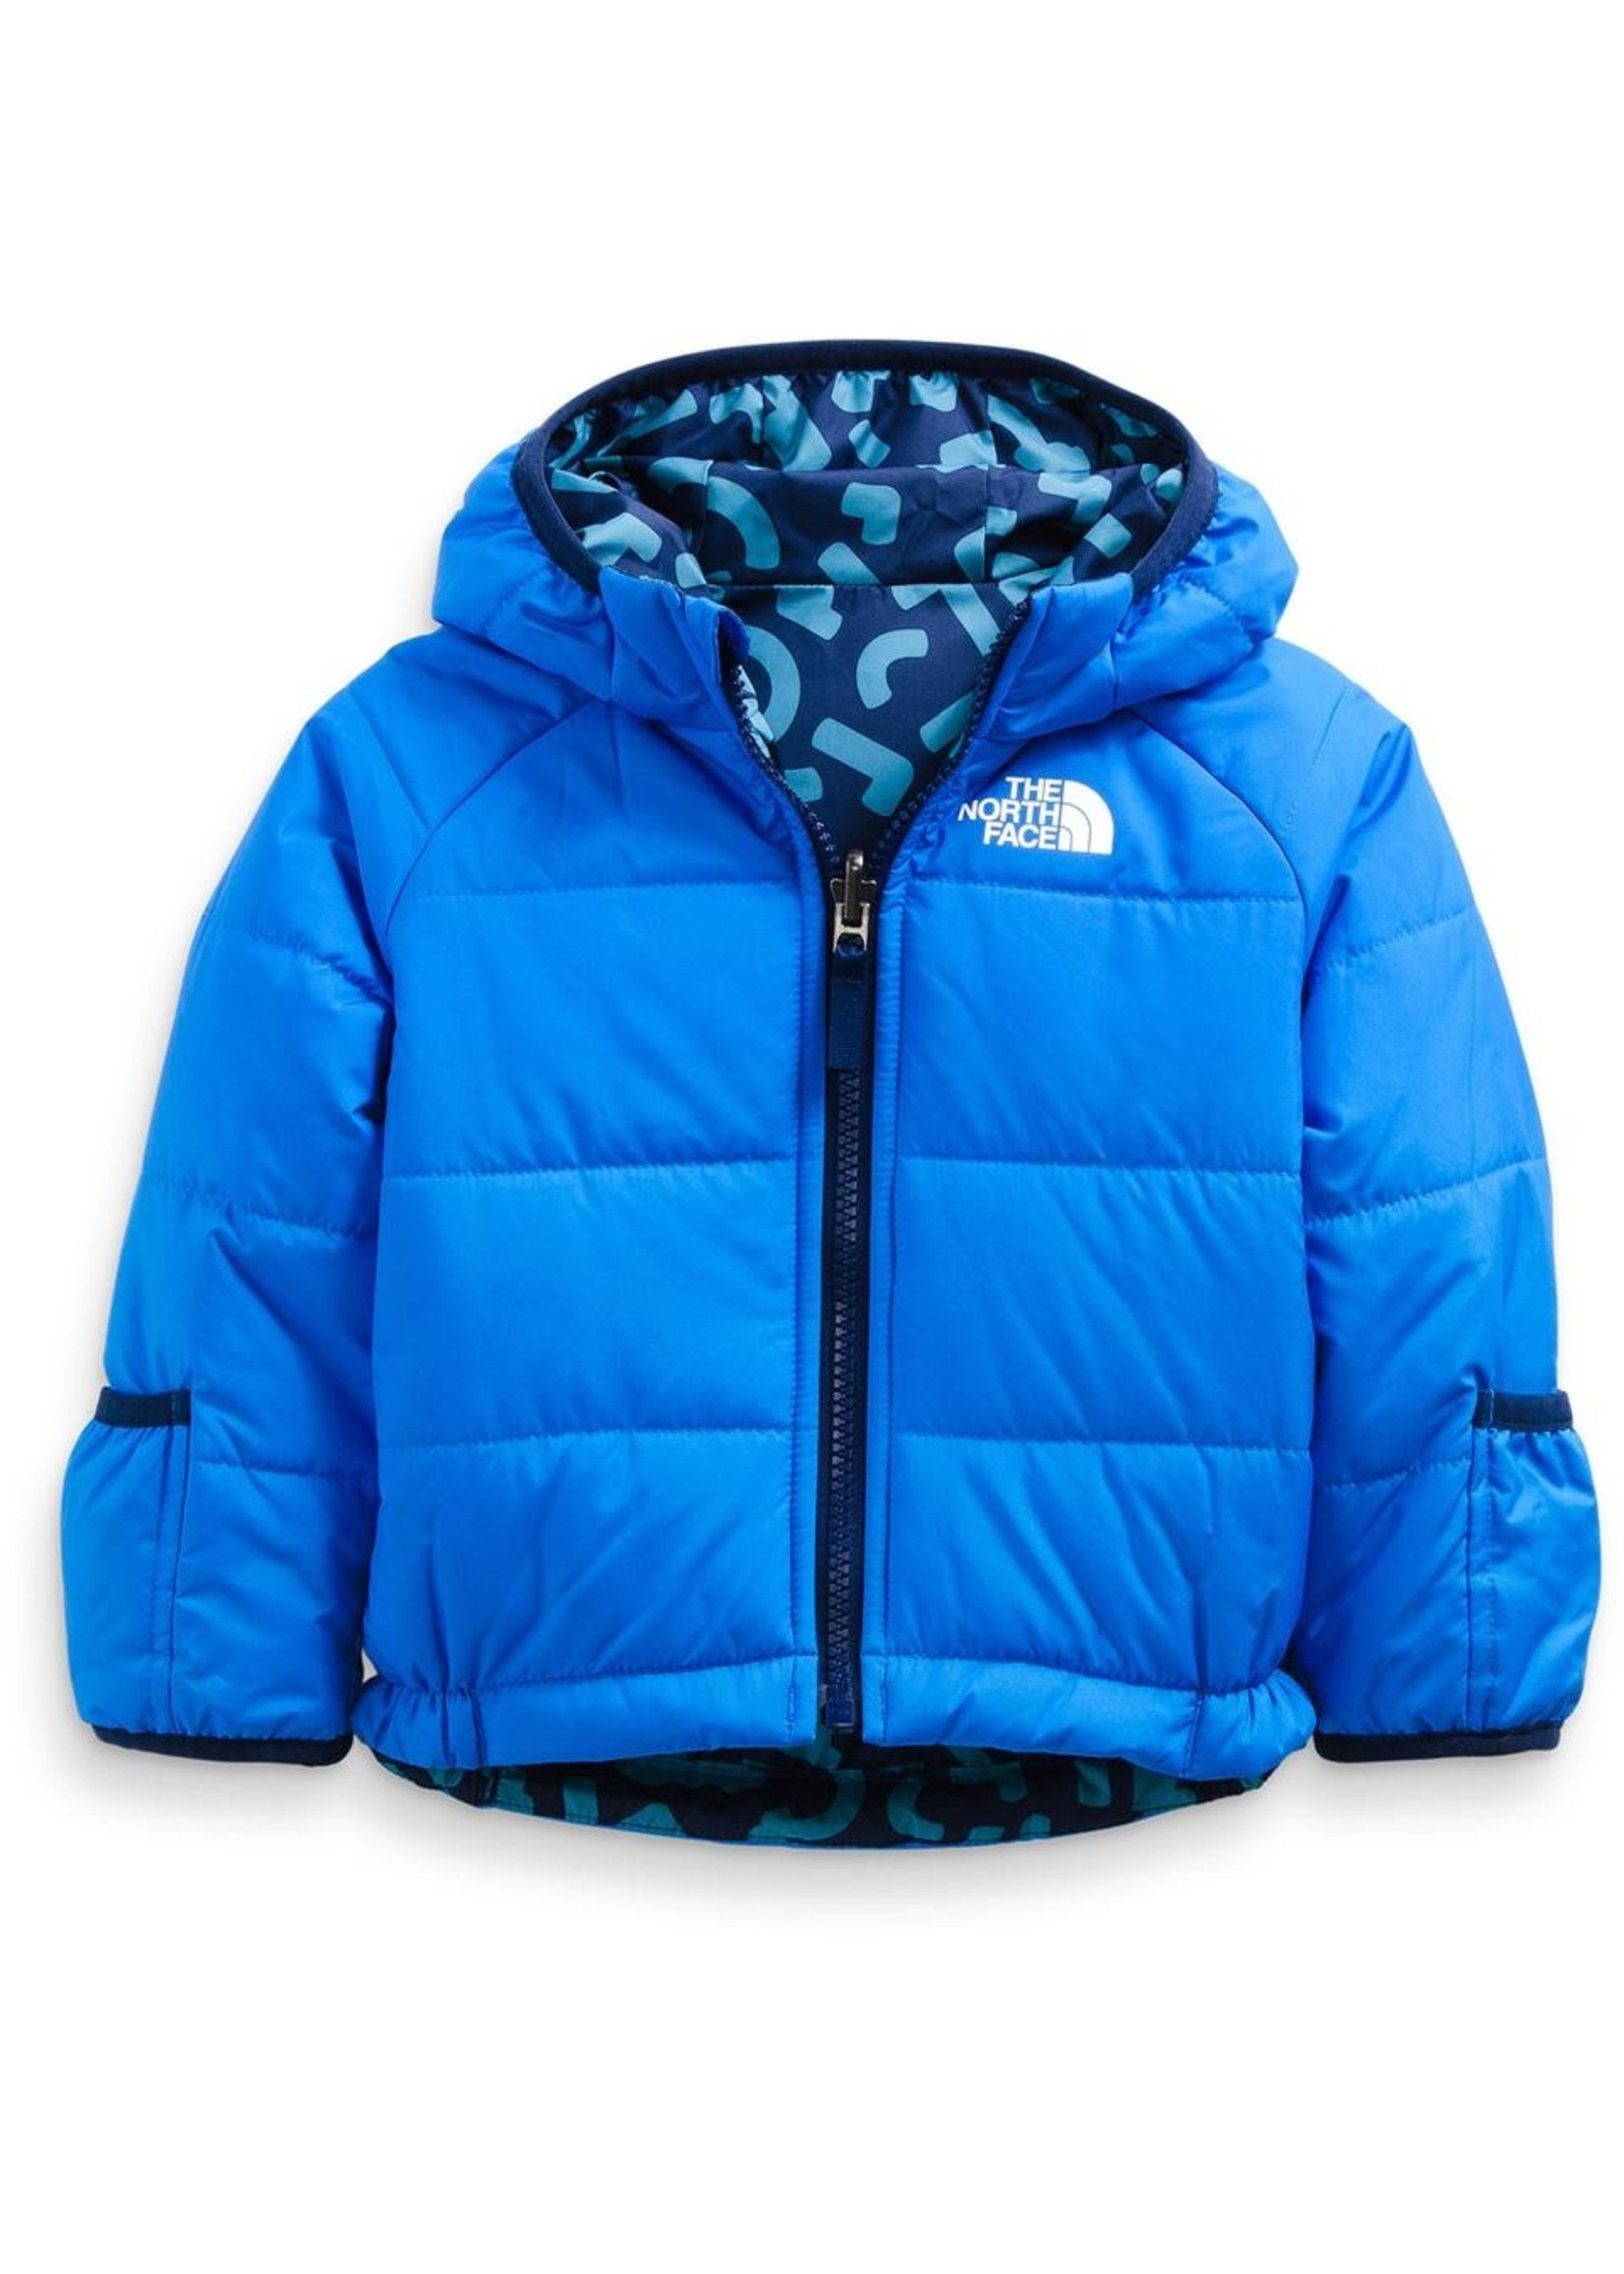 The North Face Infant Reversible Jacket Perrito Hero Blue